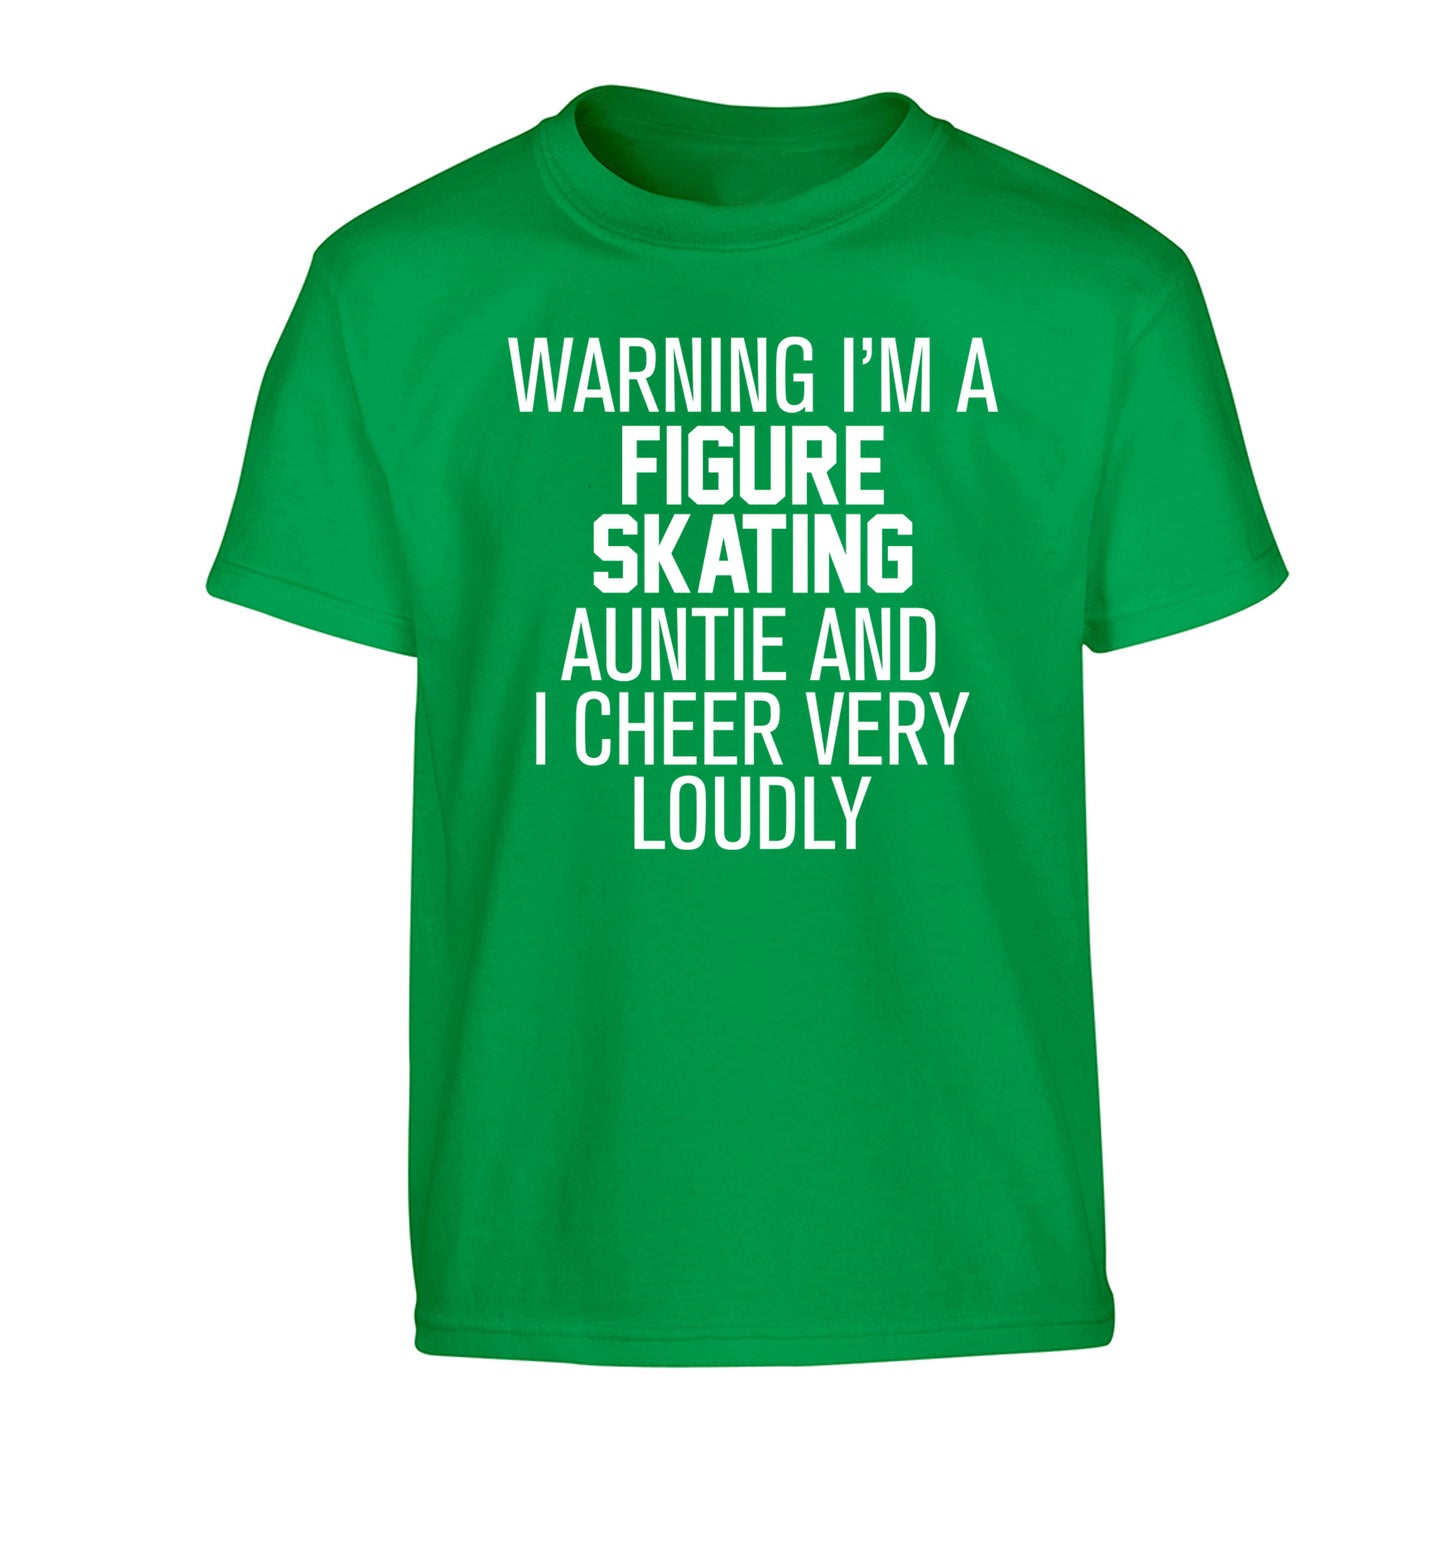 Warning I'm a figure skating auntie and I cheer very loudly Children's green Tshirt 12-14 Years